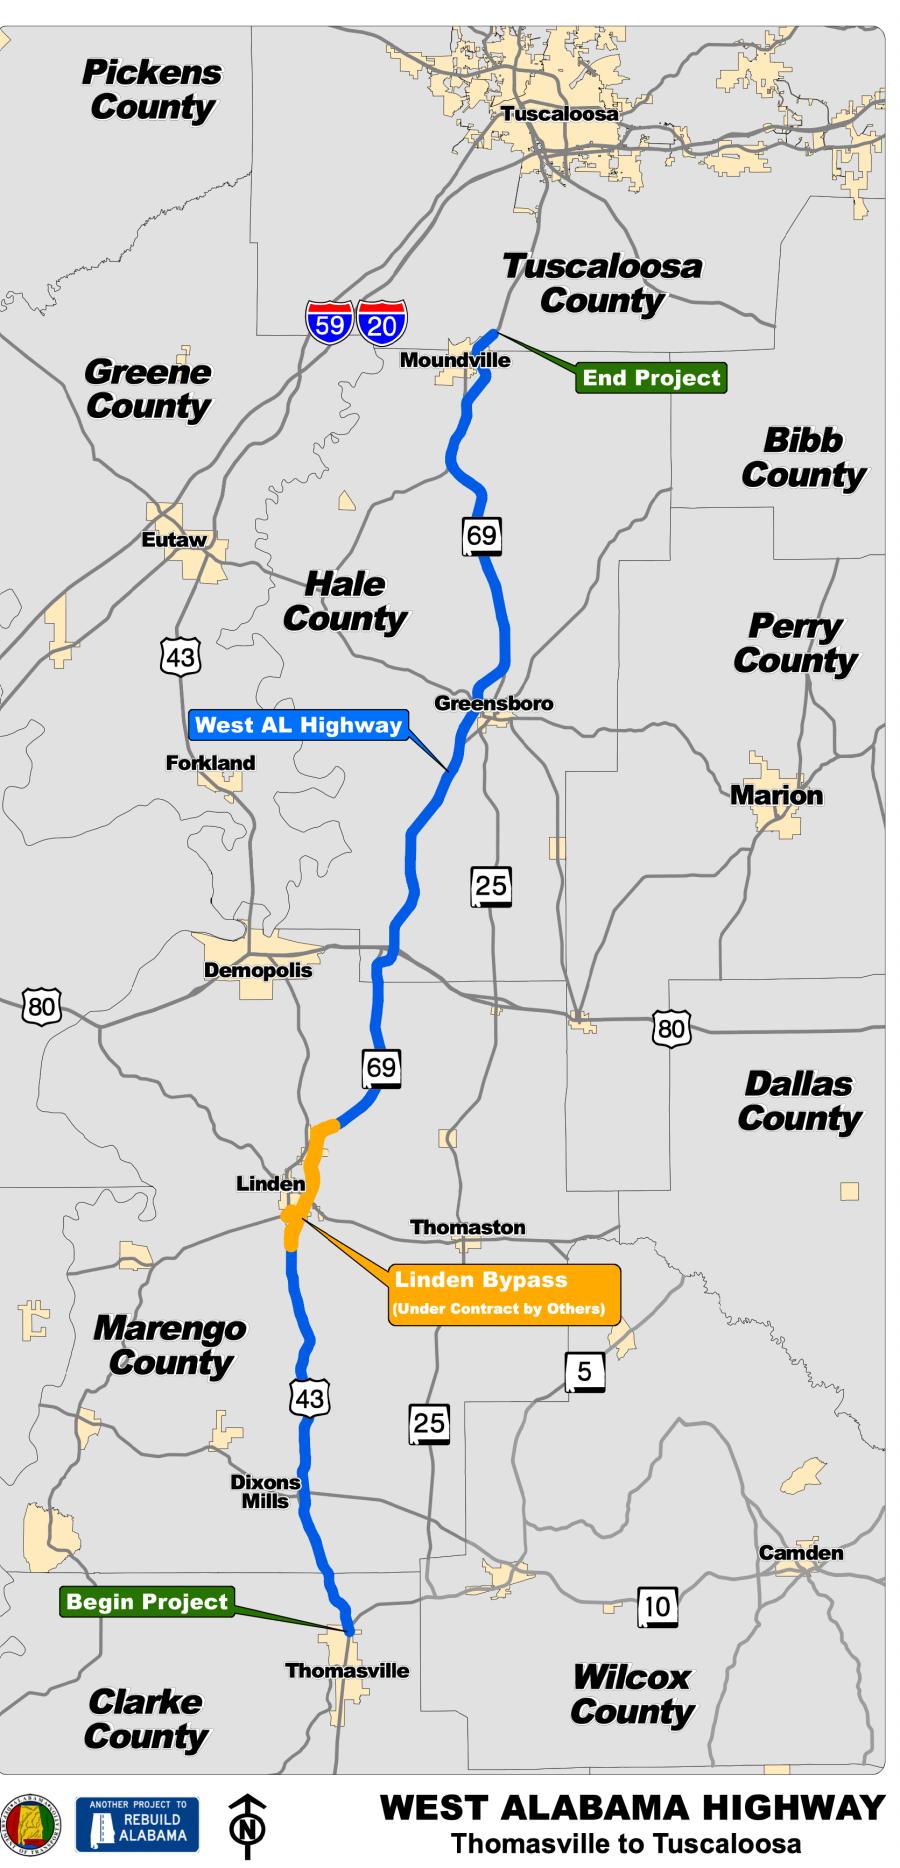 The West Alabama Highway Project will construct a 4-lane highway from Thomasville to Tuscaloosa. (Map courtesy of ALDOT)